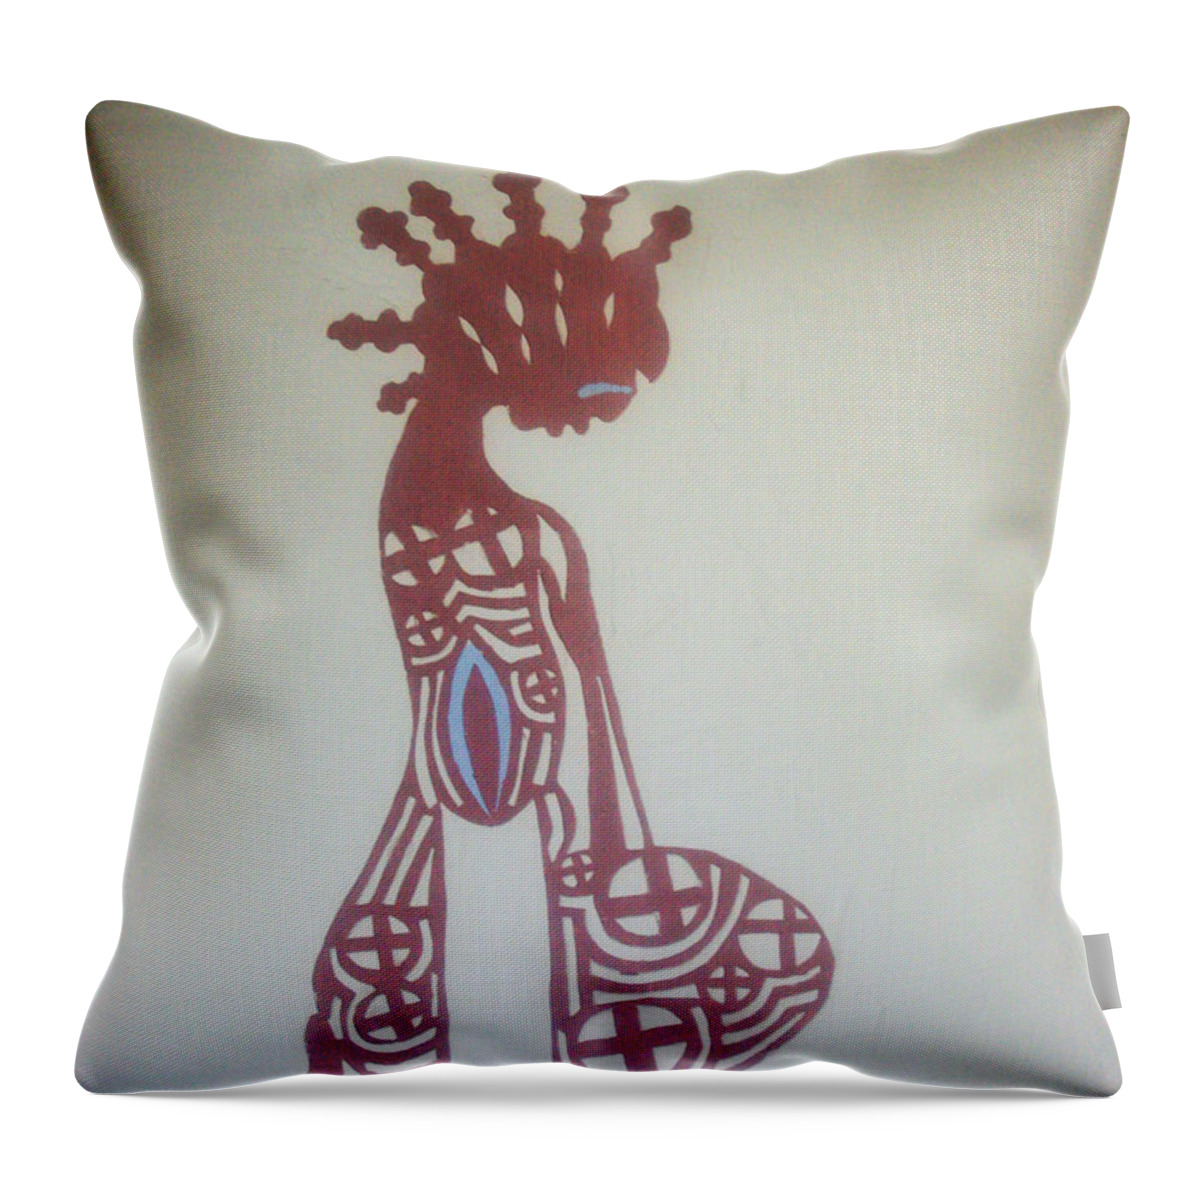 Jesus Throw Pillow featuring the painting The Wise Virgin #18 by Gloria Ssali